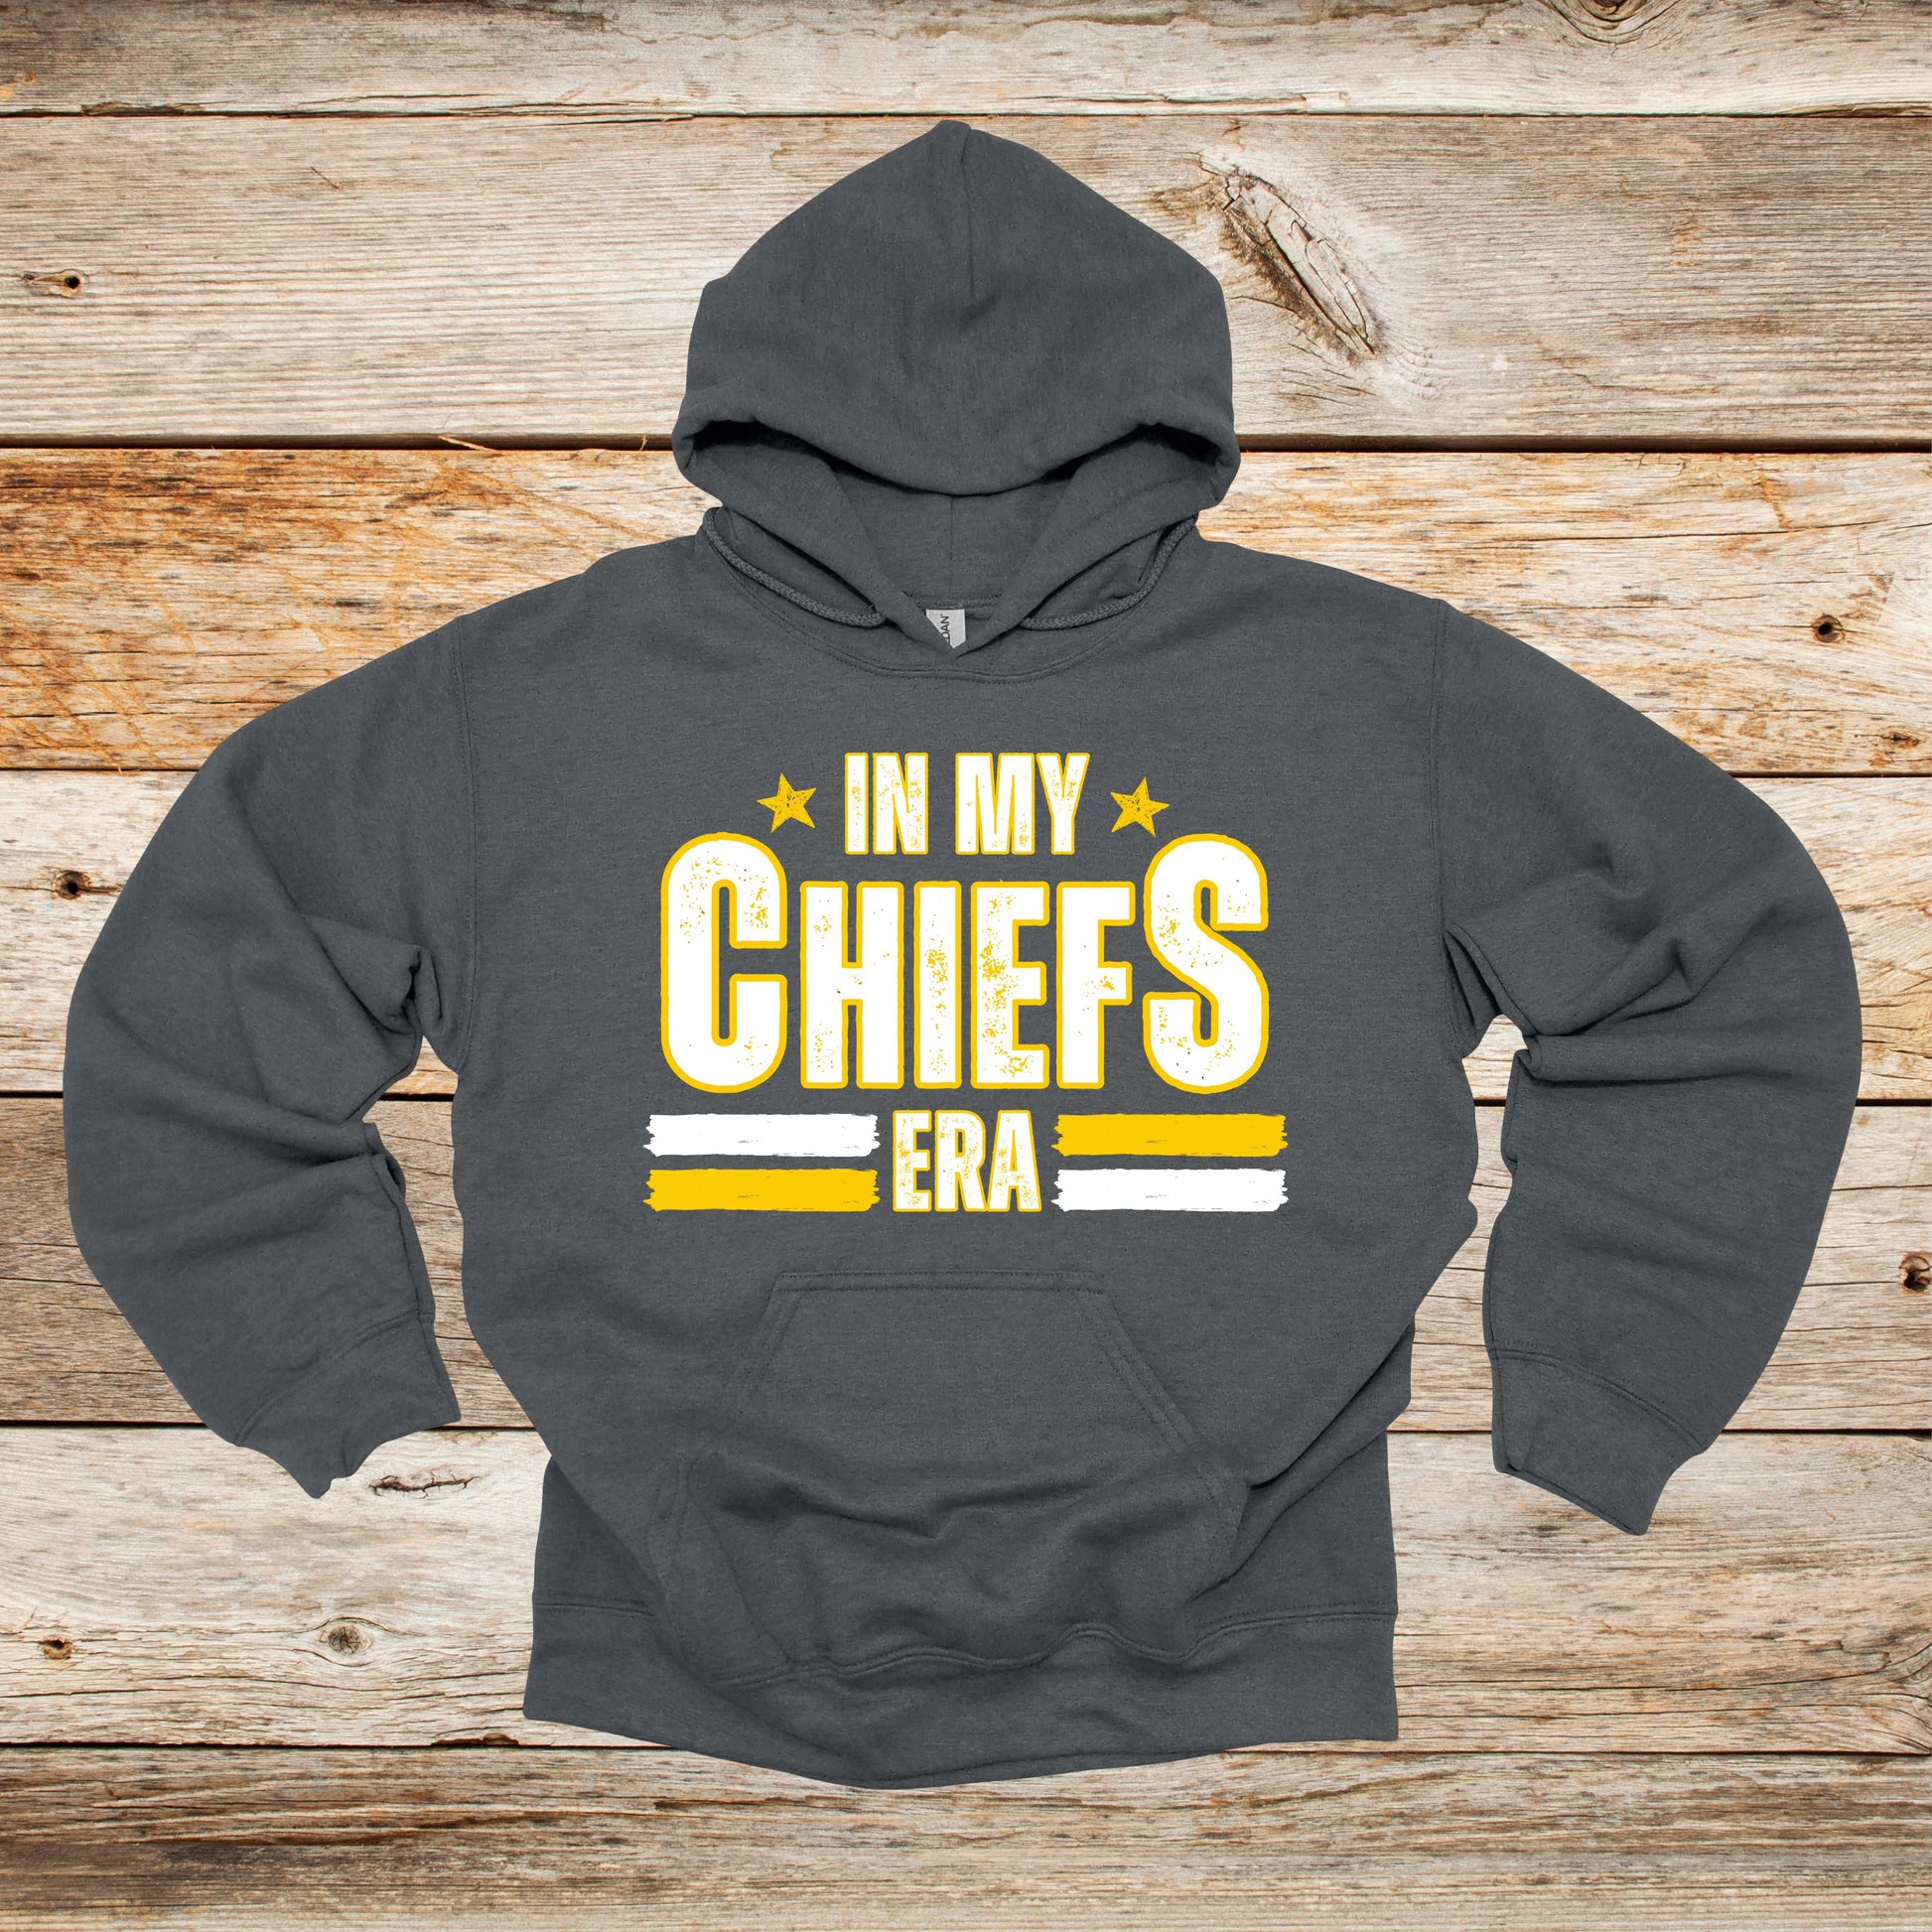 Football Crewneck and Hooded Sweatshirt - Chiefs Football - In My Chiefs Era - Adult and Children's Tee Shirts - Sports Hooded Sweatshirt Graphic Avenue Hooded Sweatshirt Dark Heather Adult Small